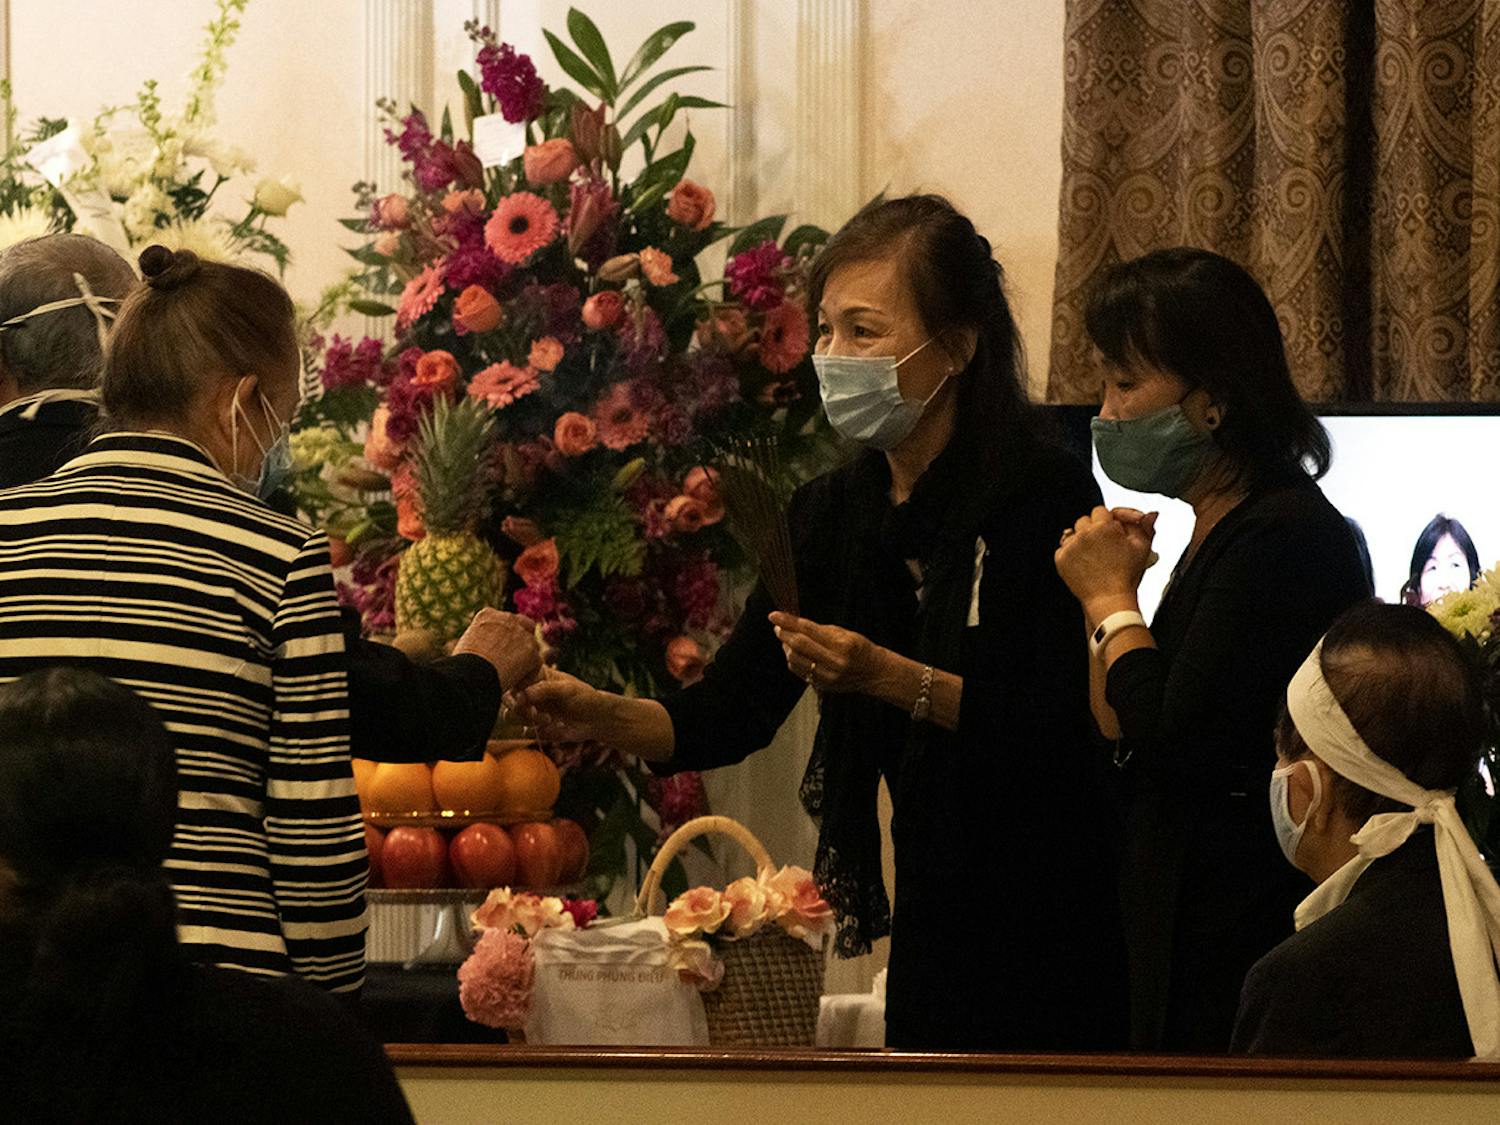 Two people hand out sticks of incense during the funeral of Bach Lien Tong Duong on Wednesday, April 14, 2021. Duong was a volunteer who taught Vietnamese at UF before an official position was created and played a significant role in creating the annual Pho fundraiser for the Vietnamese Student Organization before she passed away.